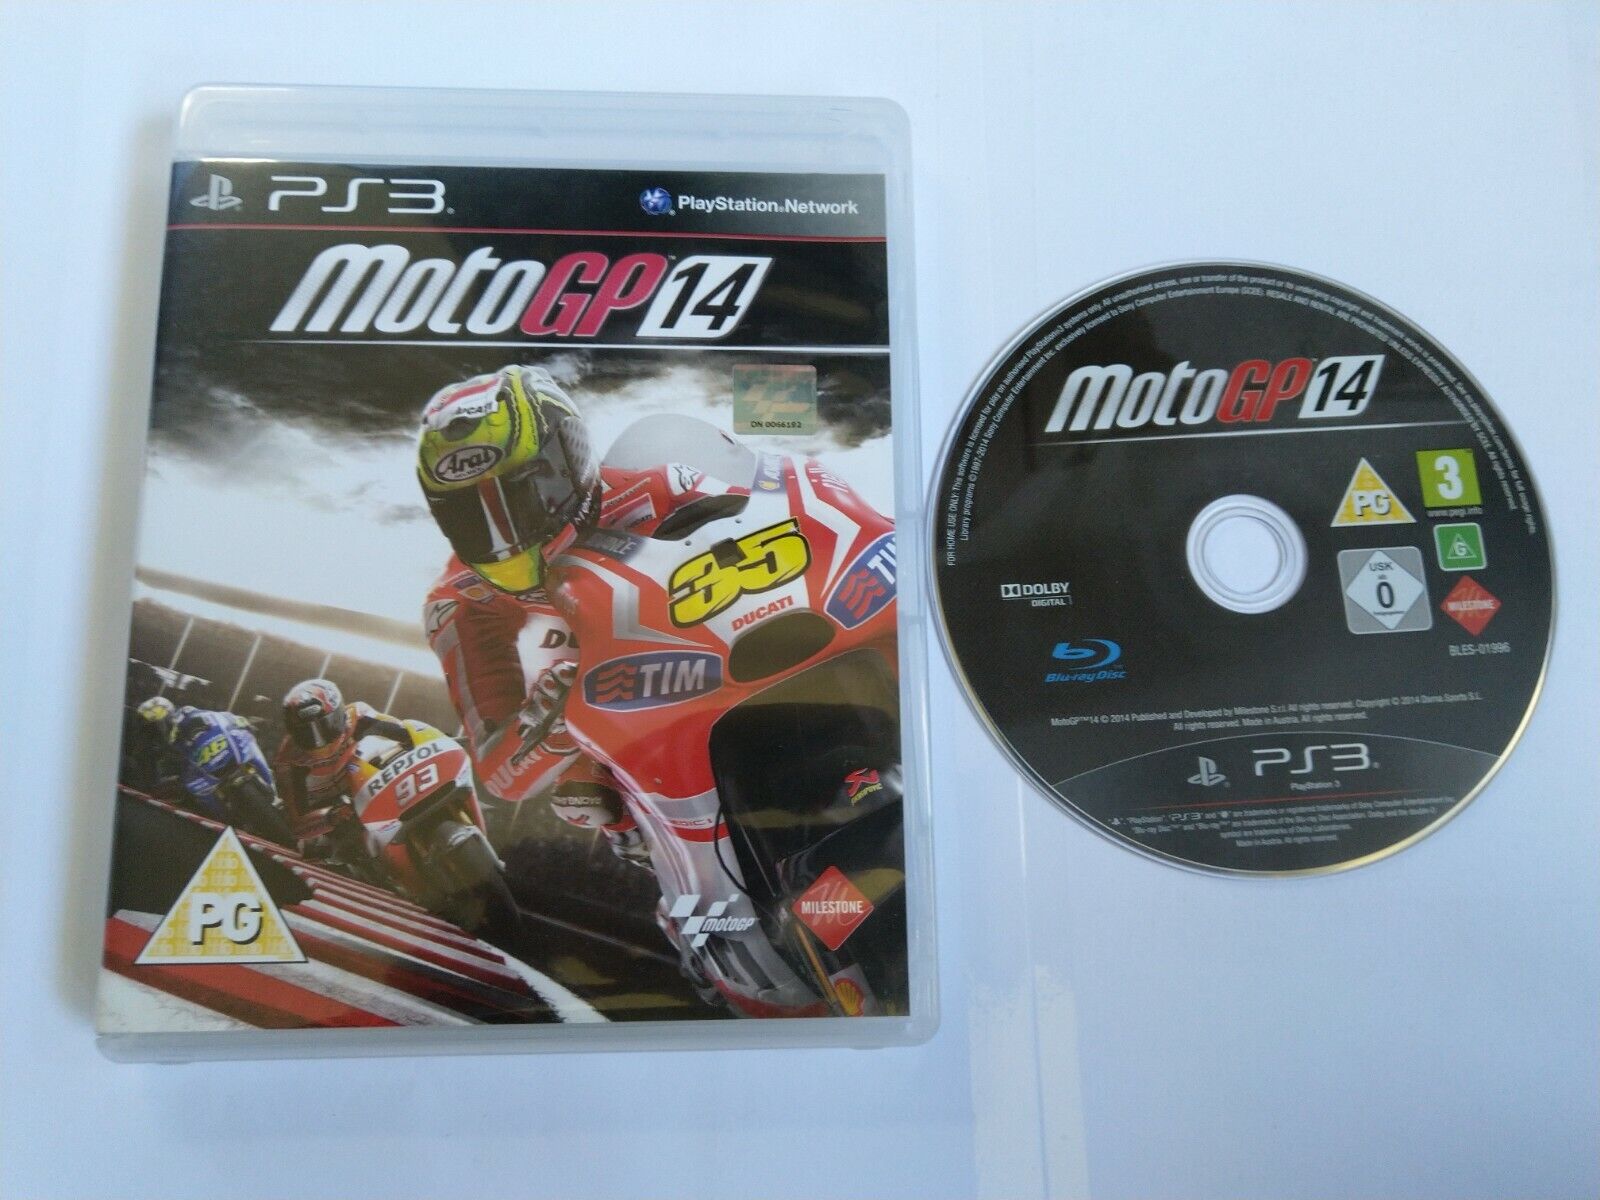 Inflates fair mere MotoGP 14 - PS3 Game - PlayStation 3 - Free, Fast P&P! | eBay